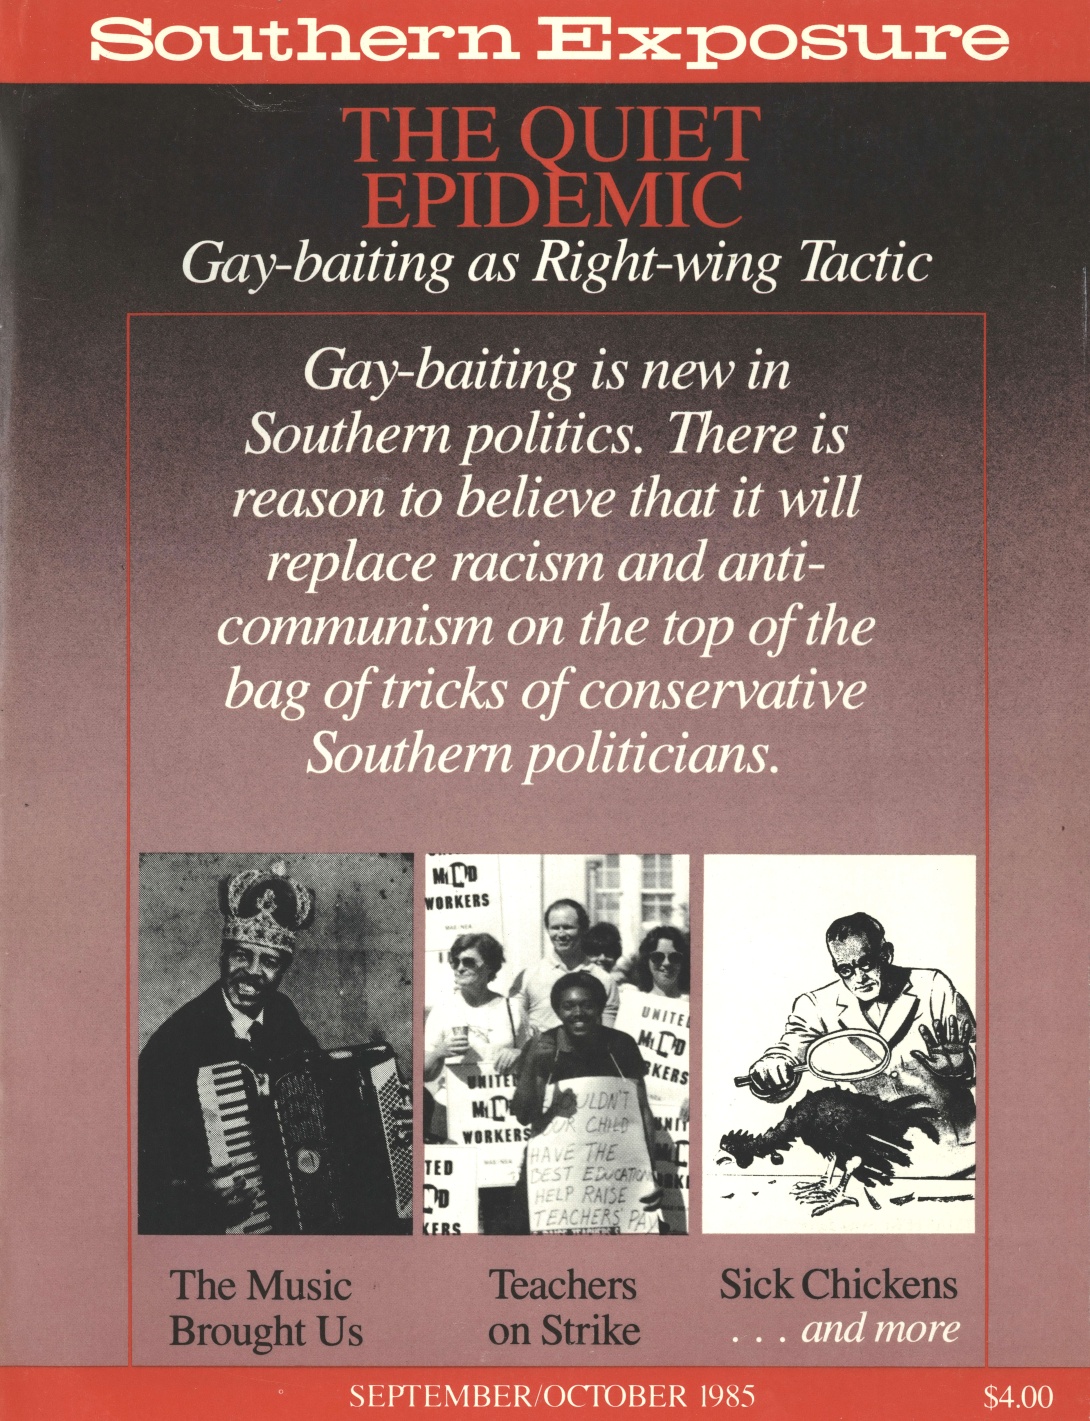 Magazine cover reading "The quiet epidemic: Gay-baiting as right-wing tactic. Gay-baiting is new in Southern politics. There is reason to believe that it will replace racism and anti-communism on the top of the bag of tricks of conservative Southern politicians."